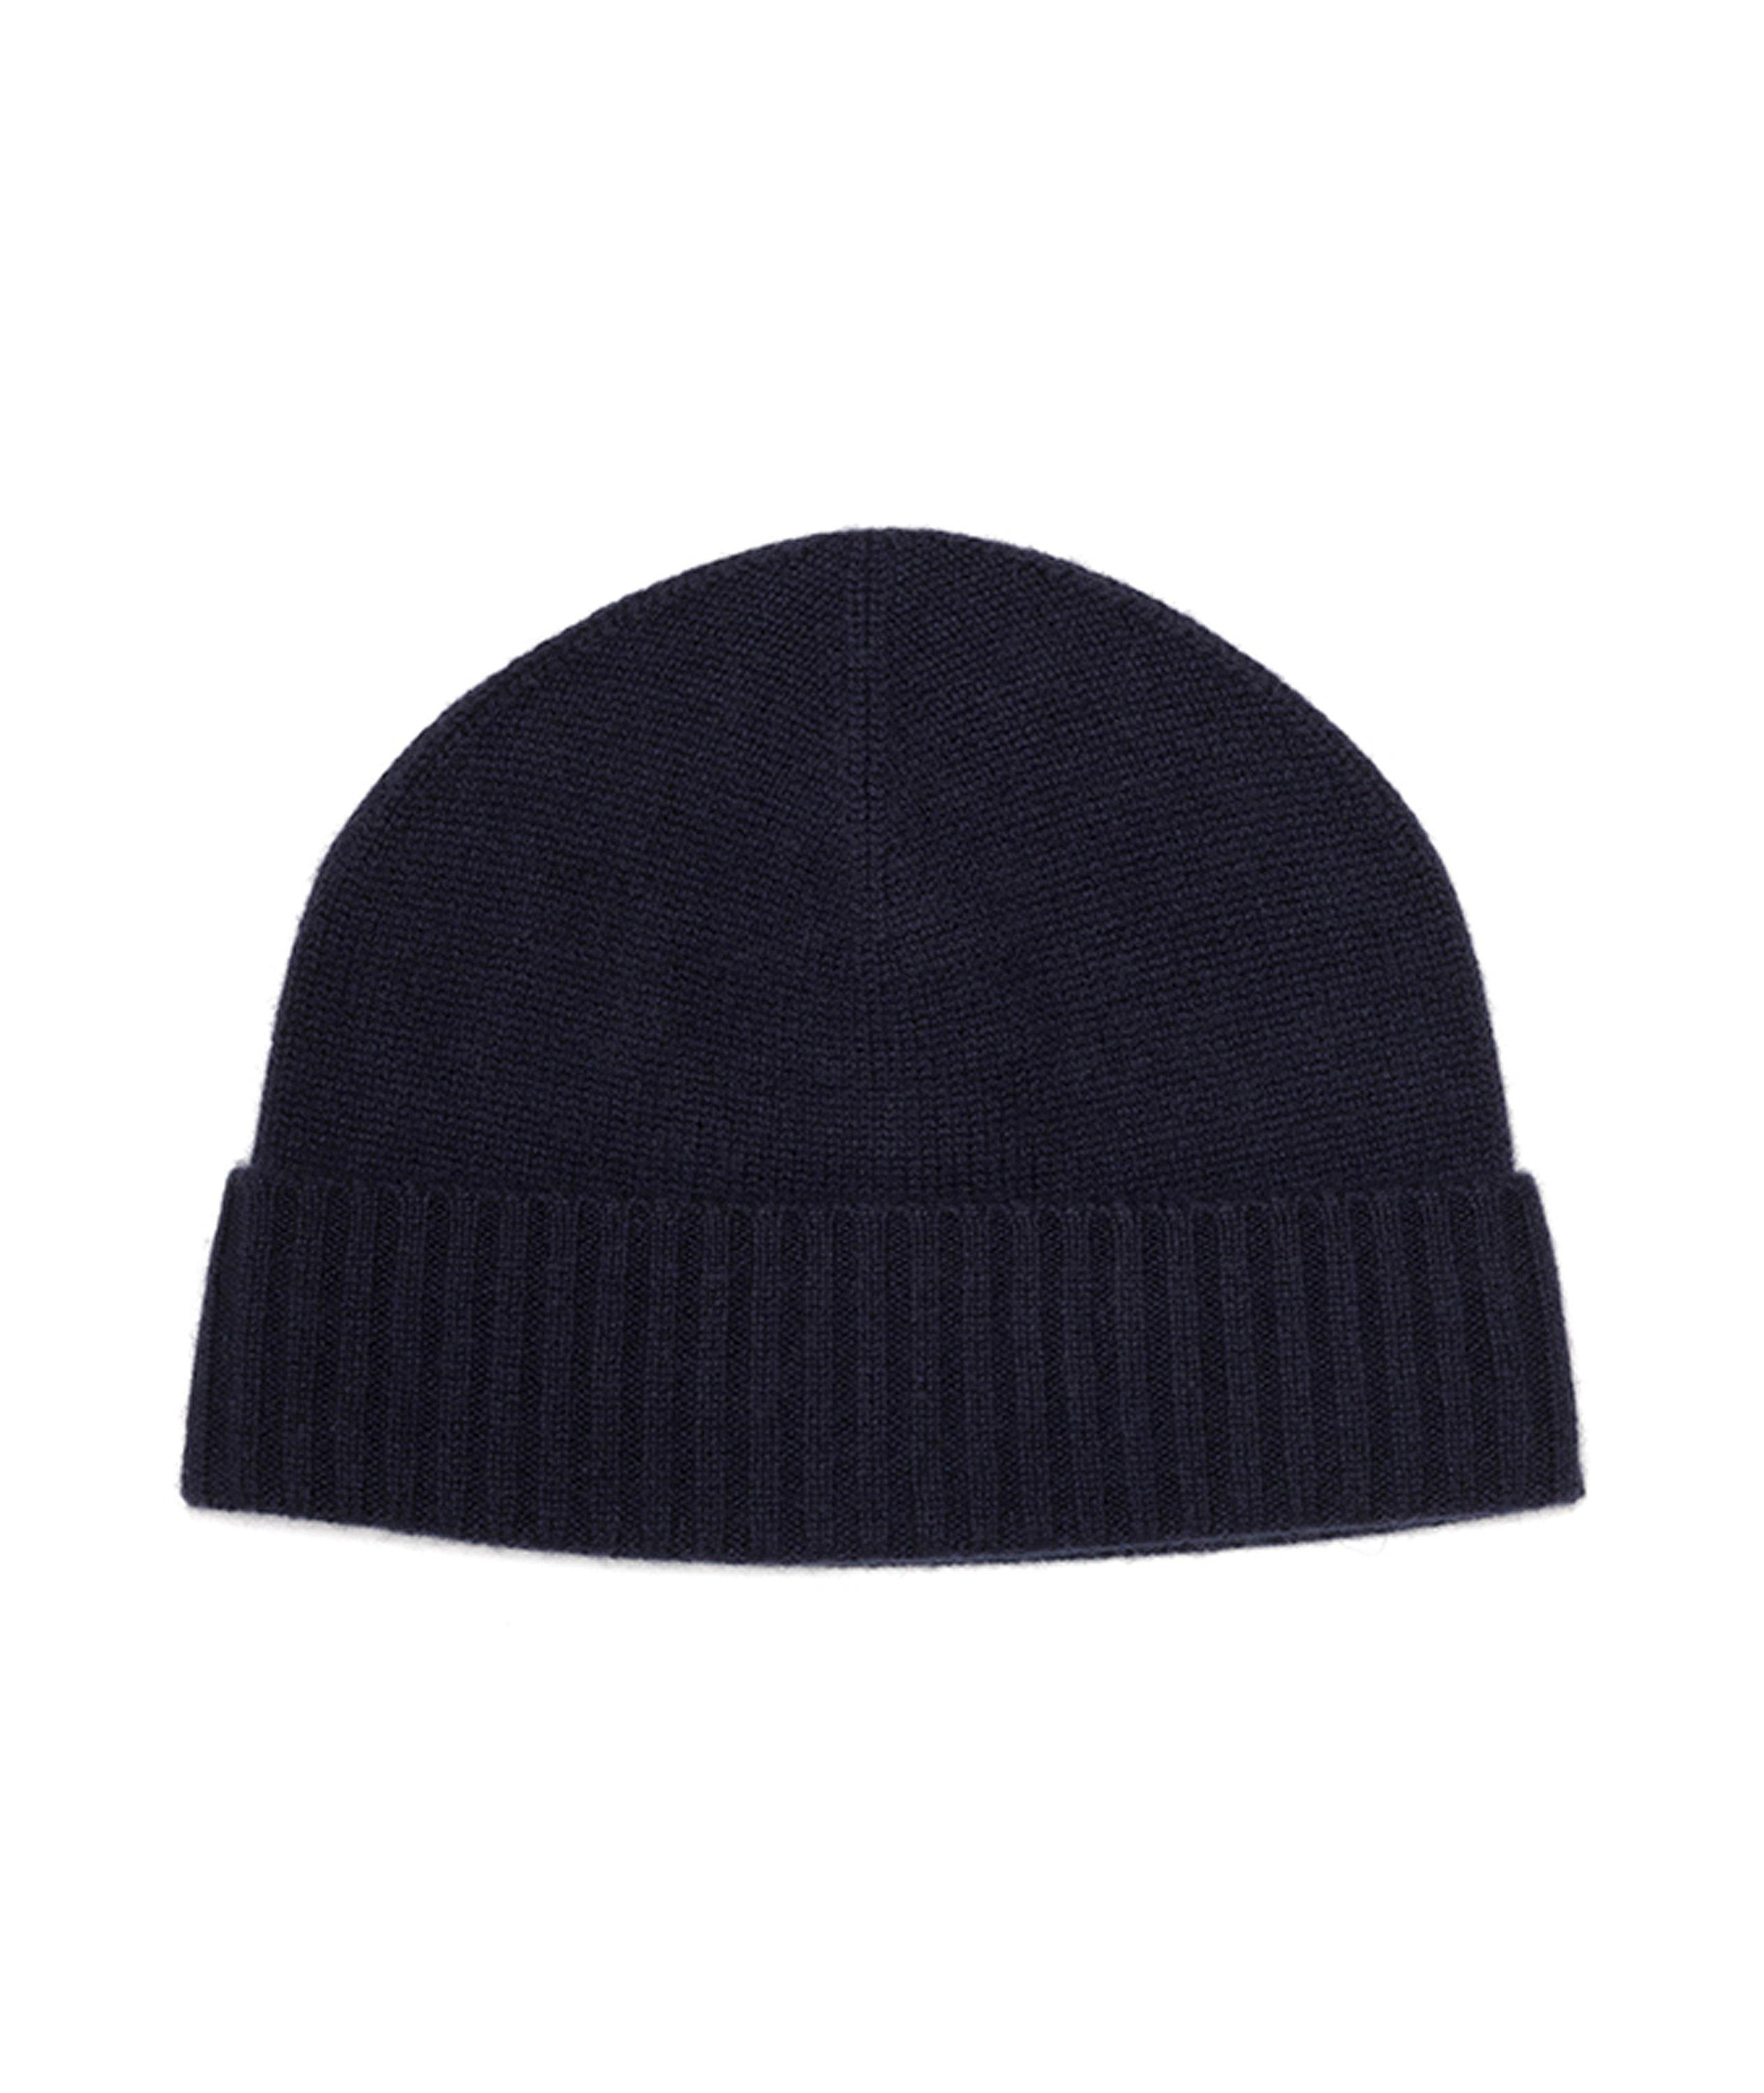 Short Roll Cashmere Beanie image 0